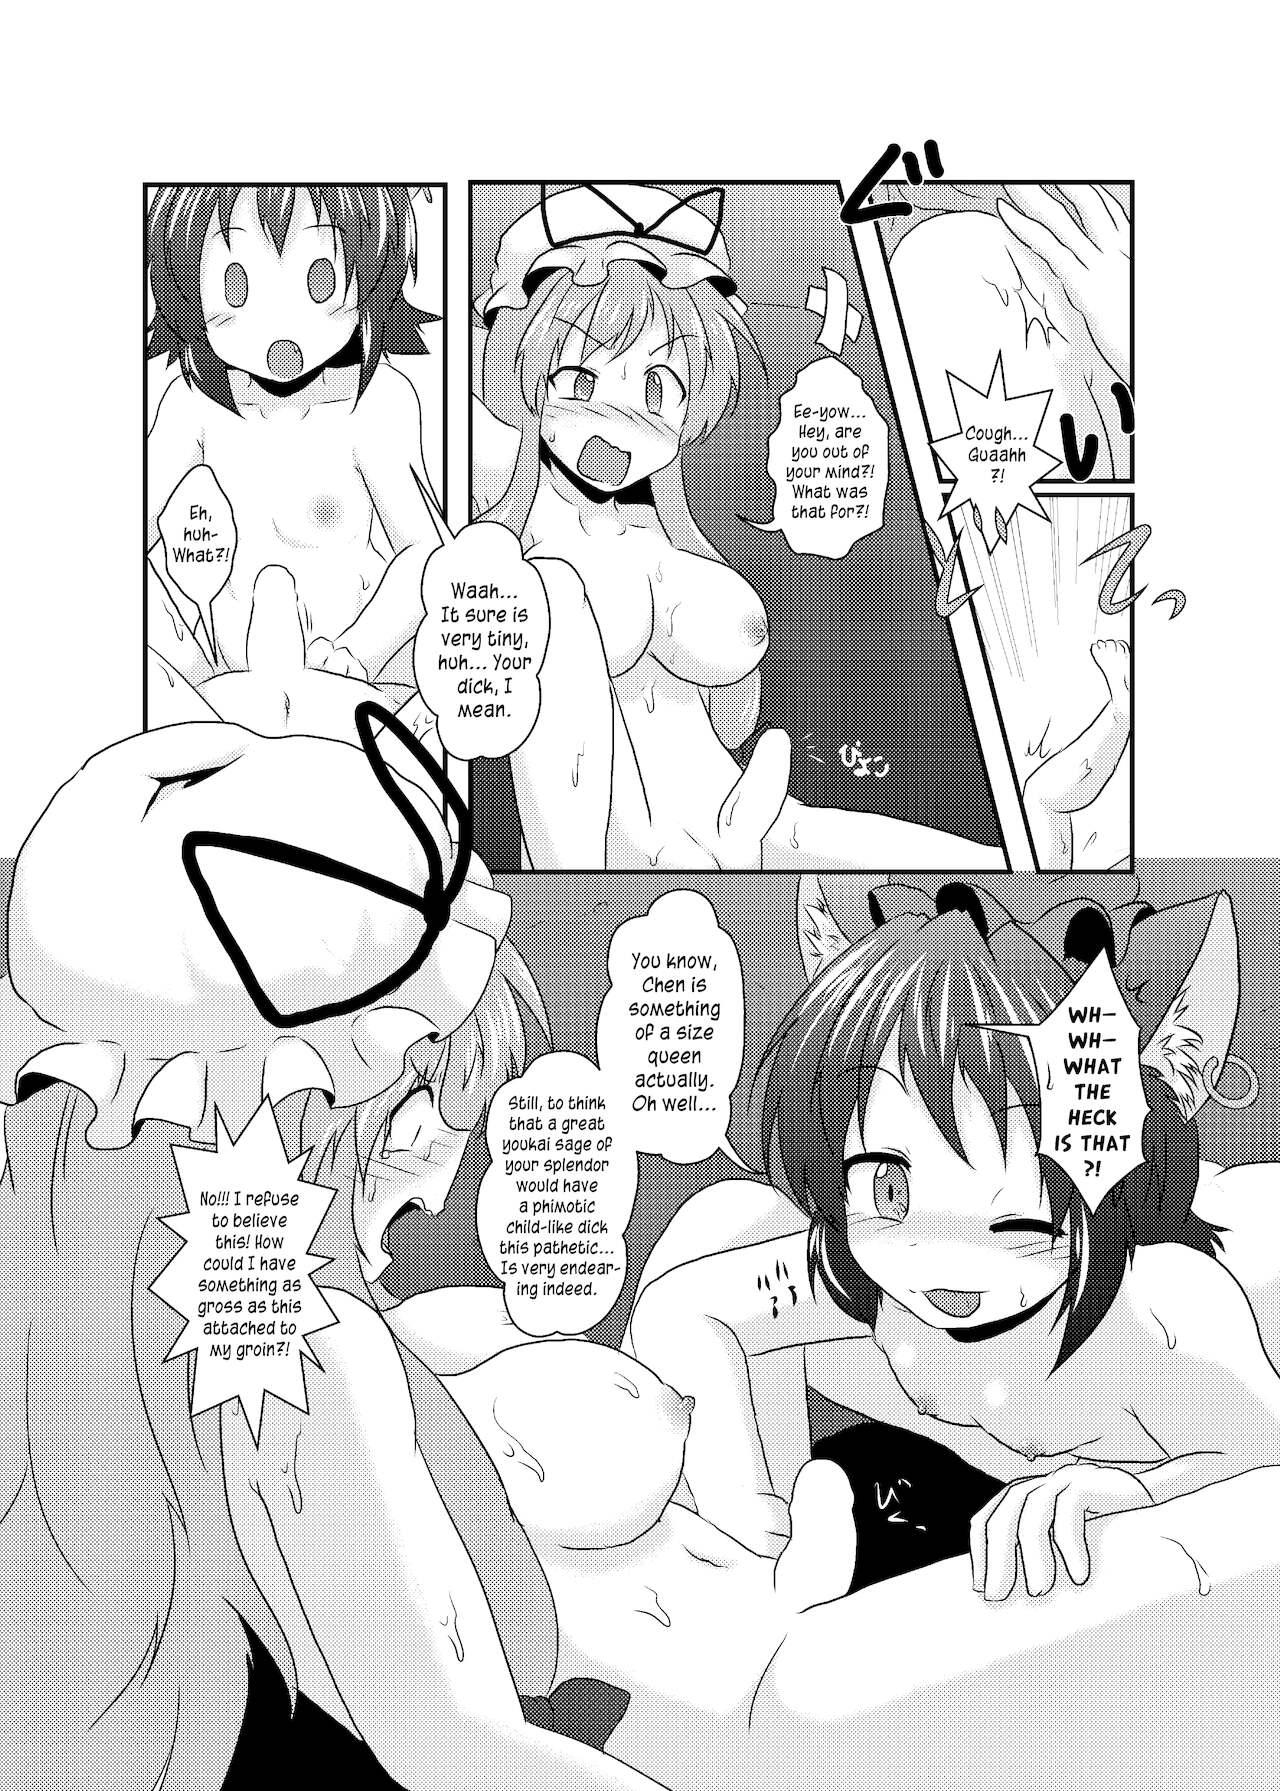 Uncensored Chotto Tsukarechatta Mitai | I think I'm a little possessed! - Touhou project Por - Page 10